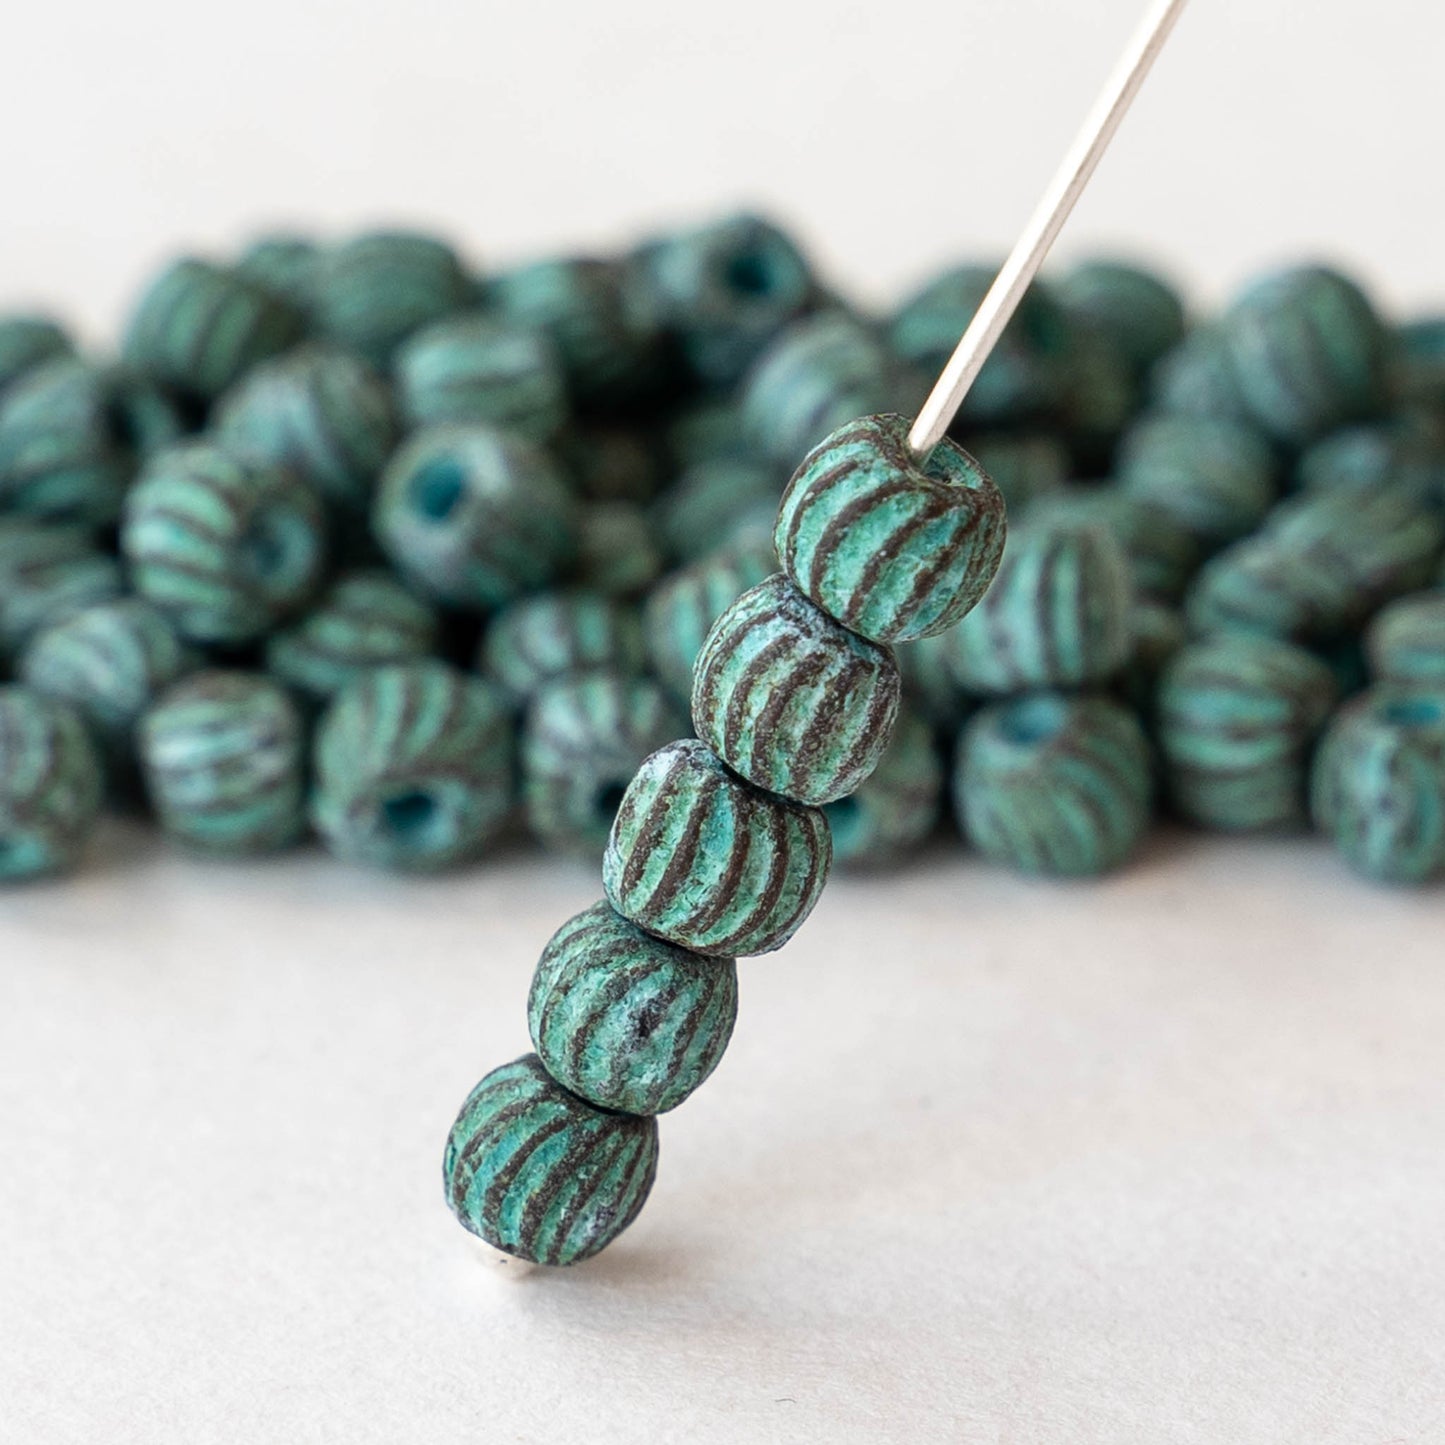 6mm Round Glass Beads - Viridian Teal - 50 – funkyprettybeads